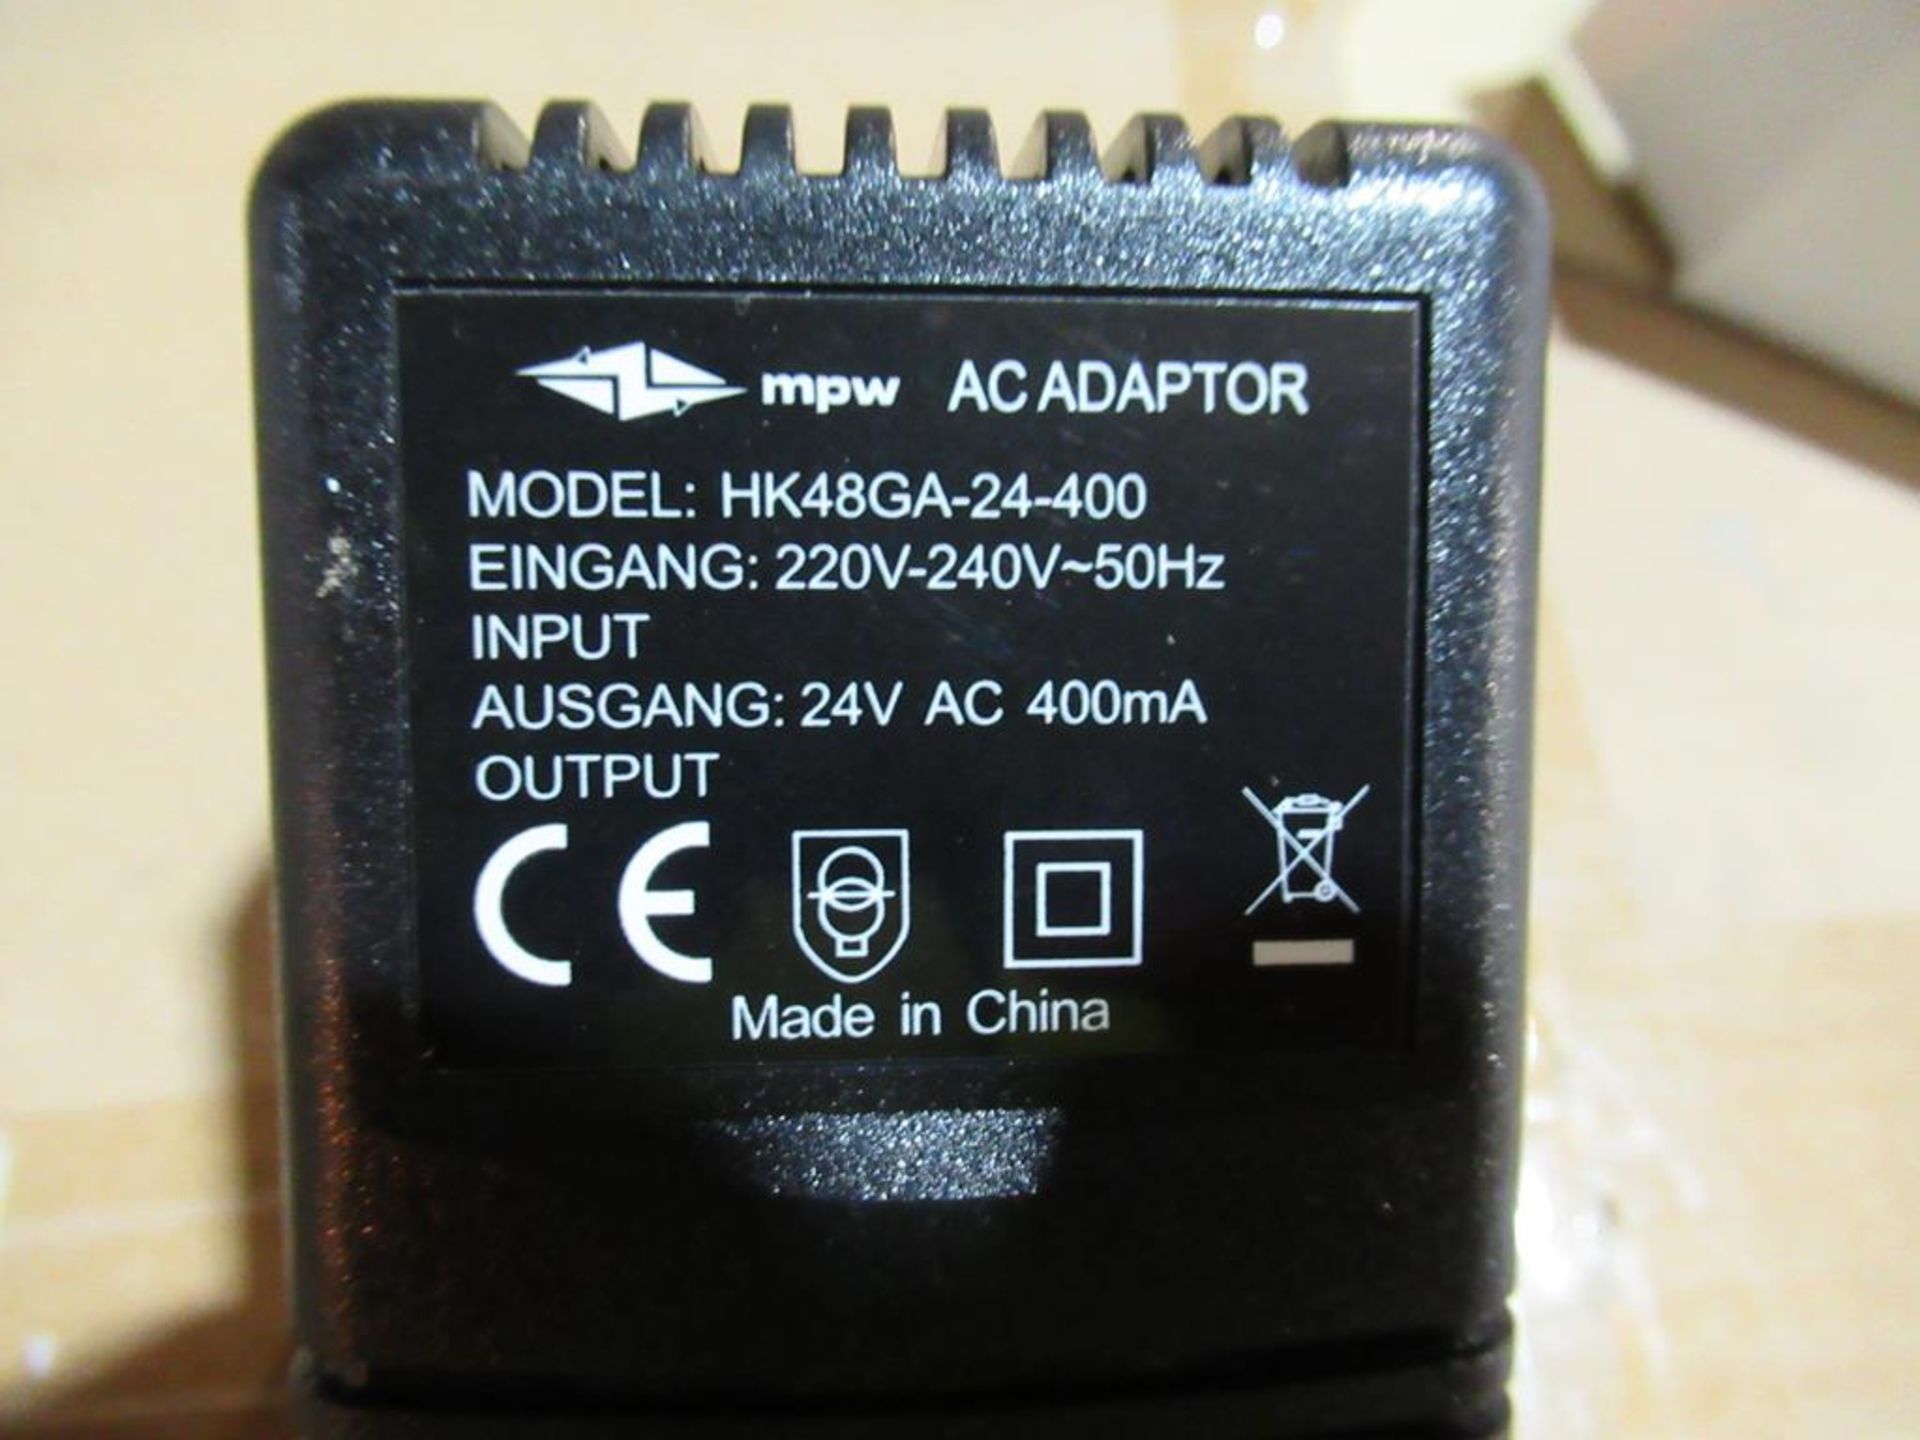 108x Euro Linear Mains Adaptor 24V AC 400mA "0.25" Push on Female Connector - Image 2 of 4